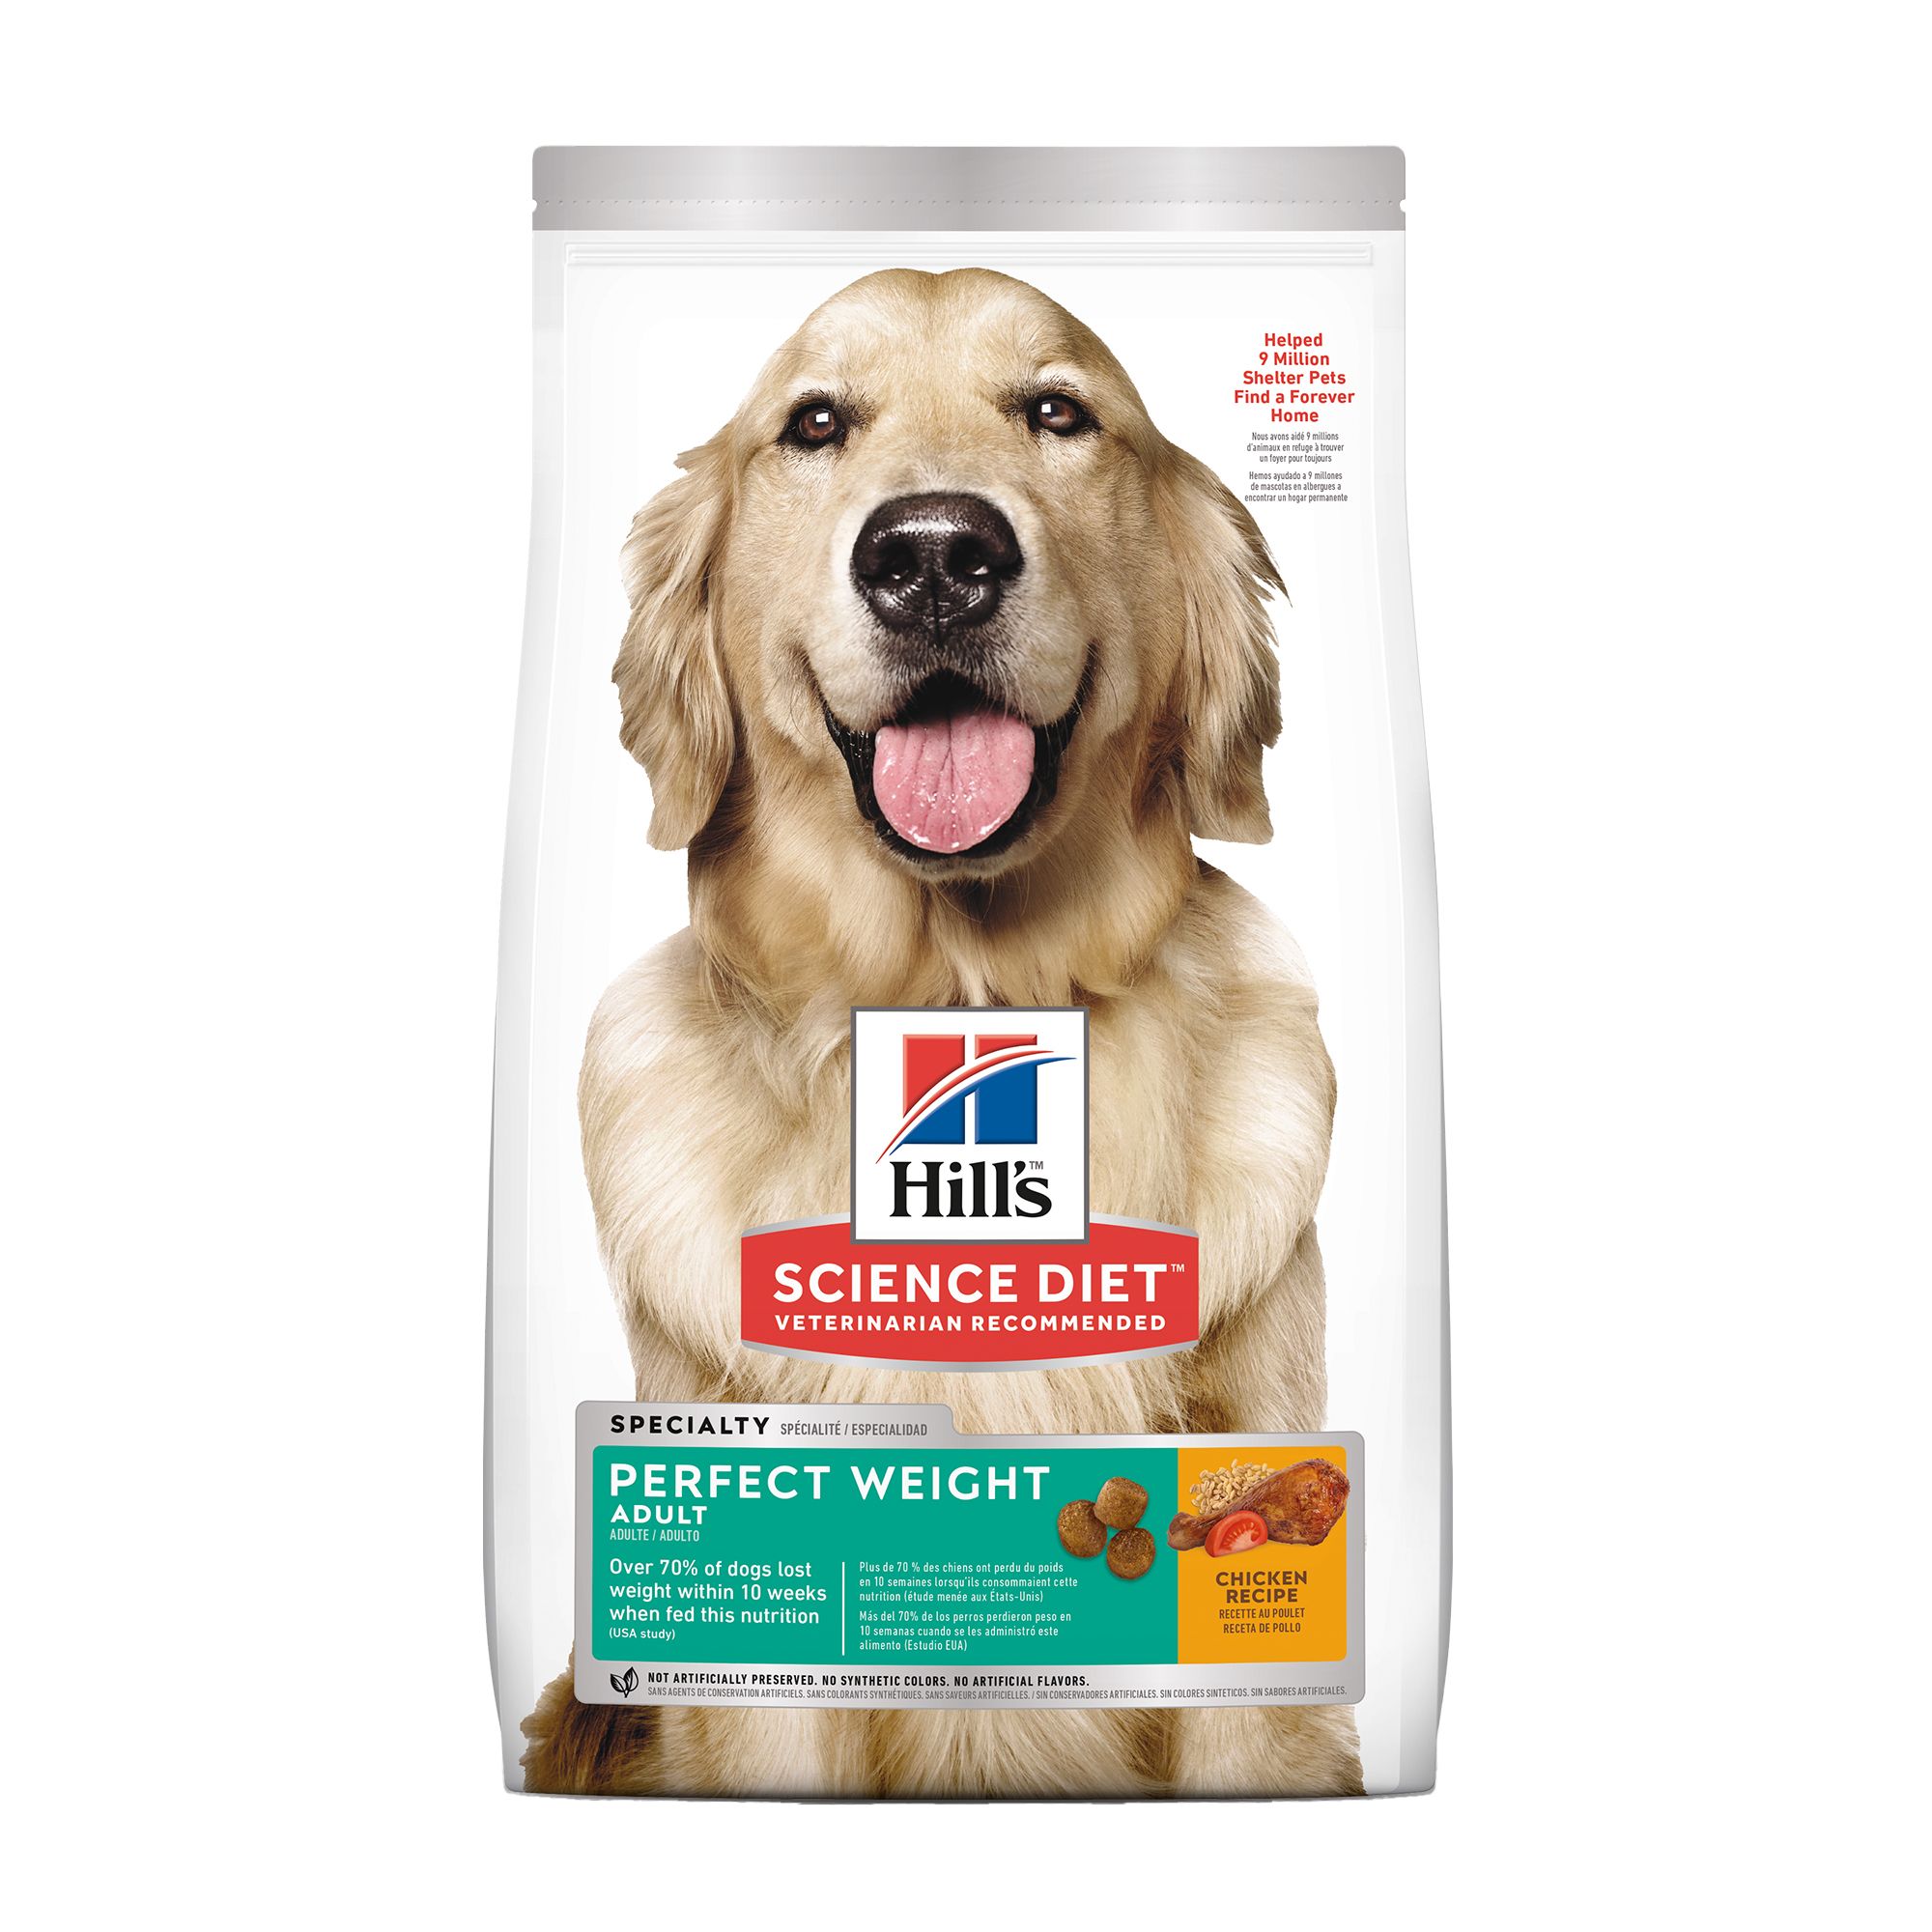 Hills® Science Diet® Perfect Weight Adult Dog Food 